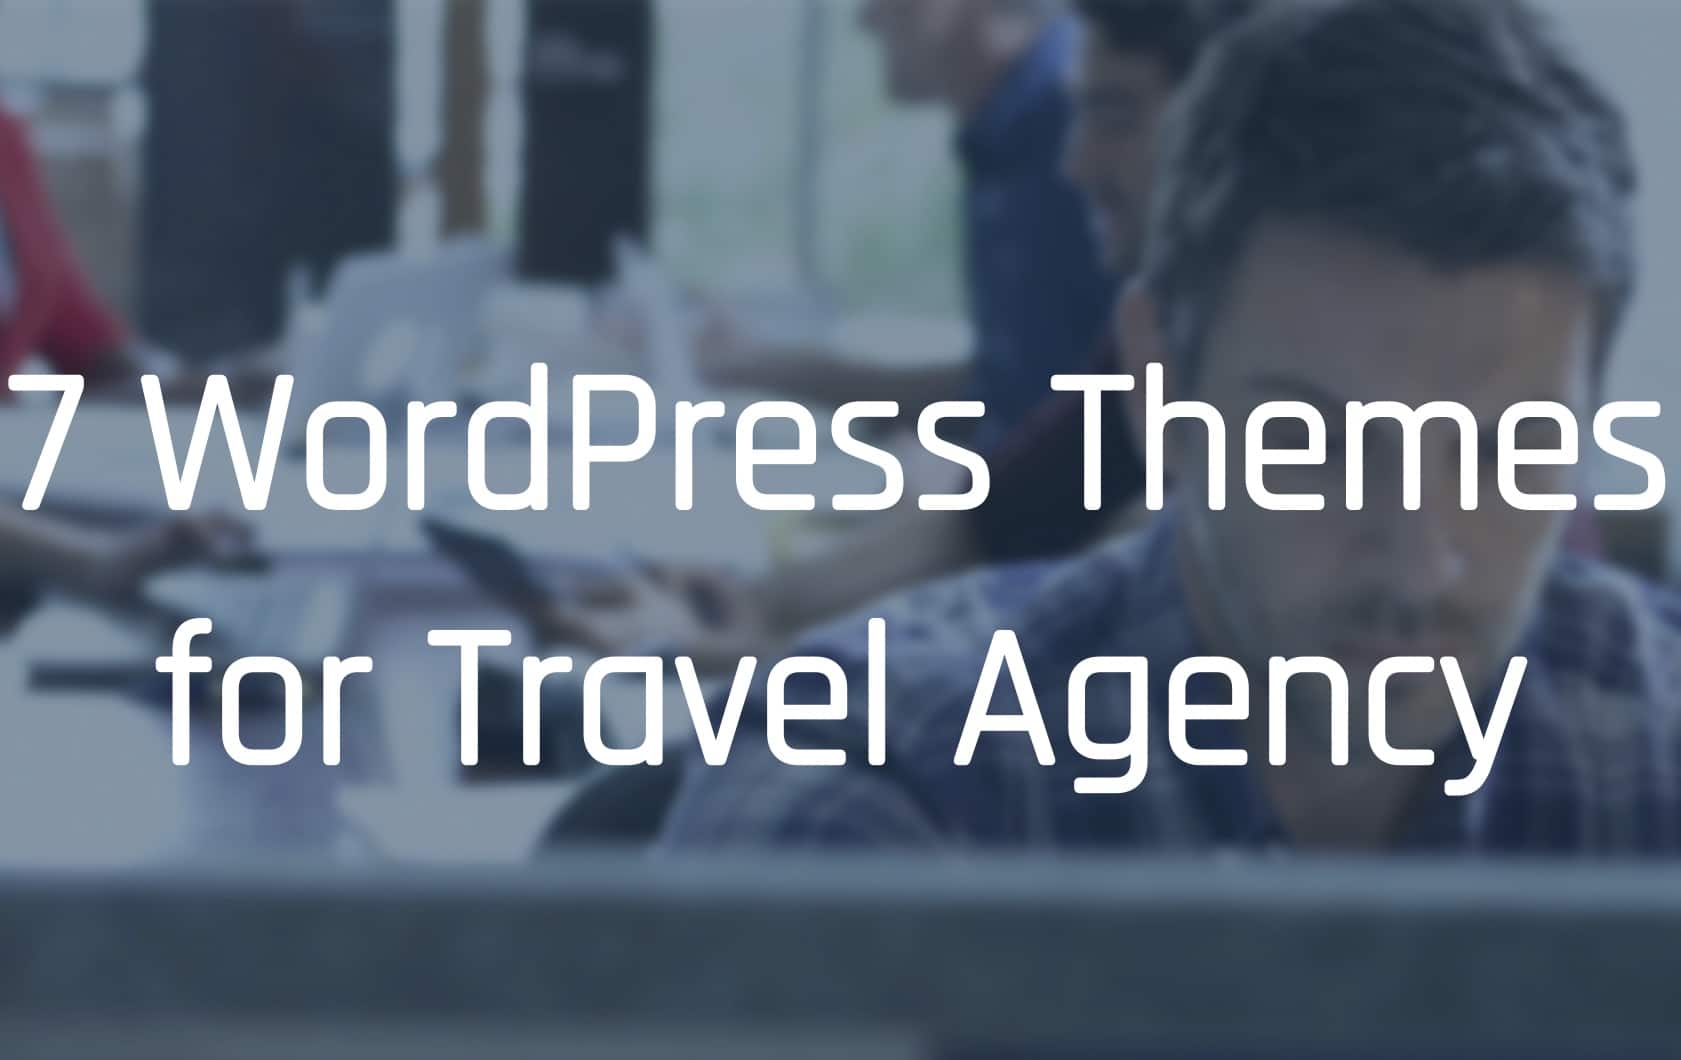 This image is showcasing seven different WordPress themes that are designed specifically for travel agencies.